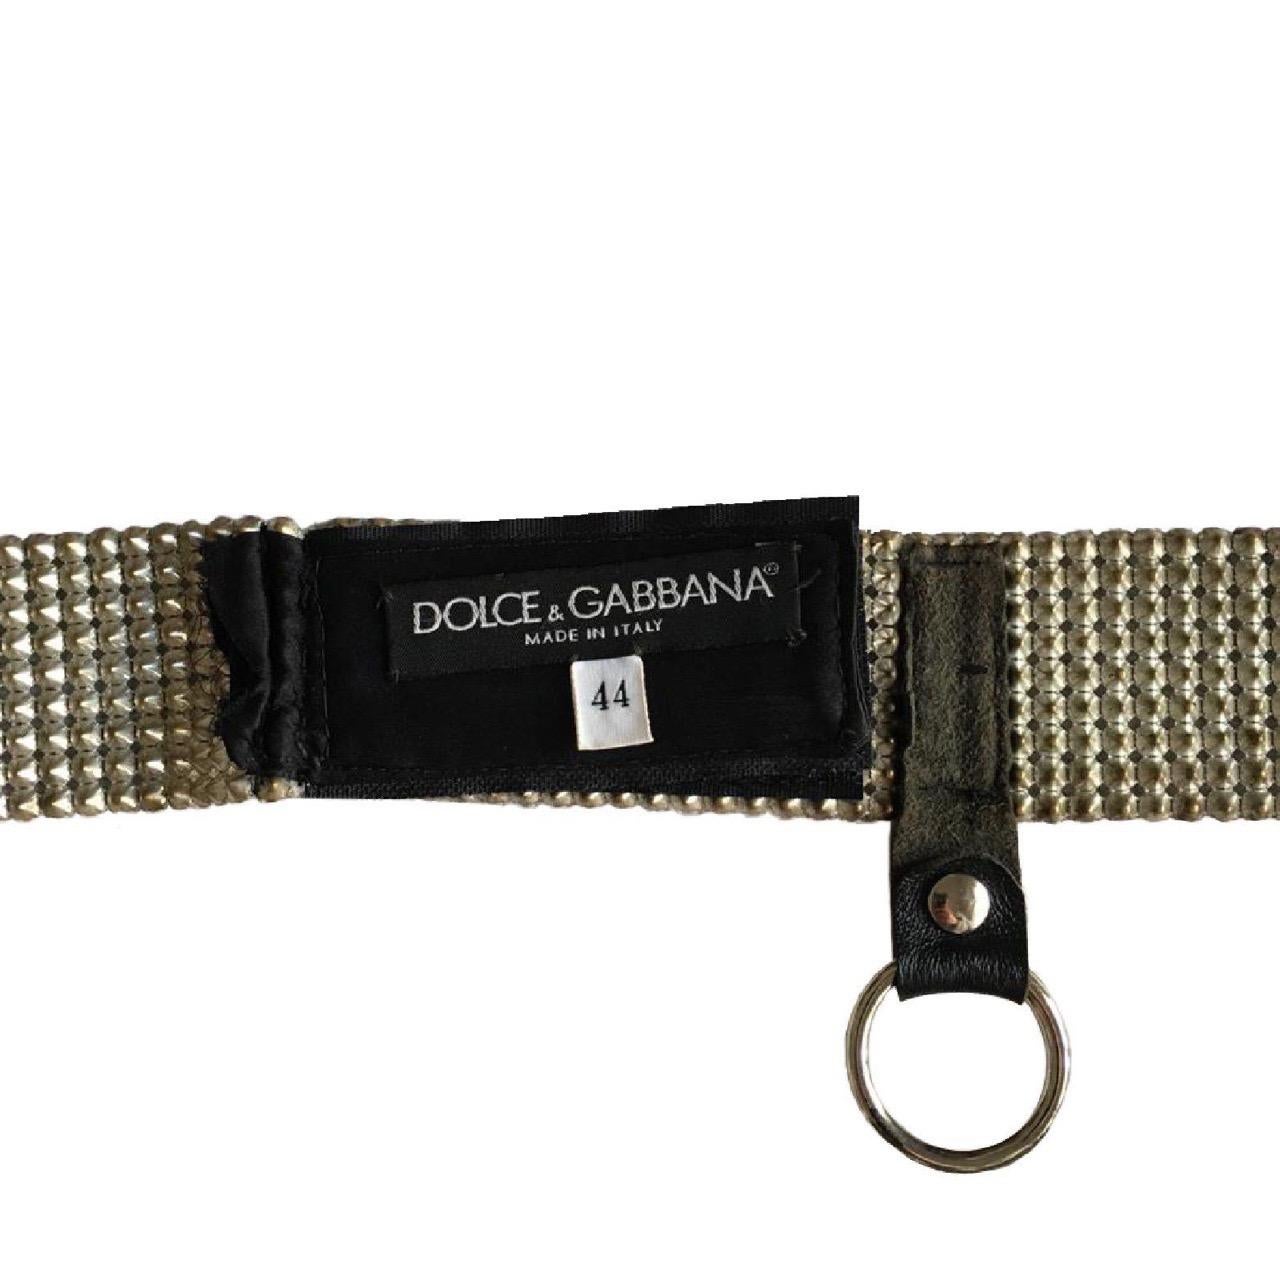 Dolce & Gabbana Swarovski Belt from the Spring Summer 2000 “Mix & Match” collection.

Swarovski Crystals with leather tab and Velcro closure system.

Size IT 44